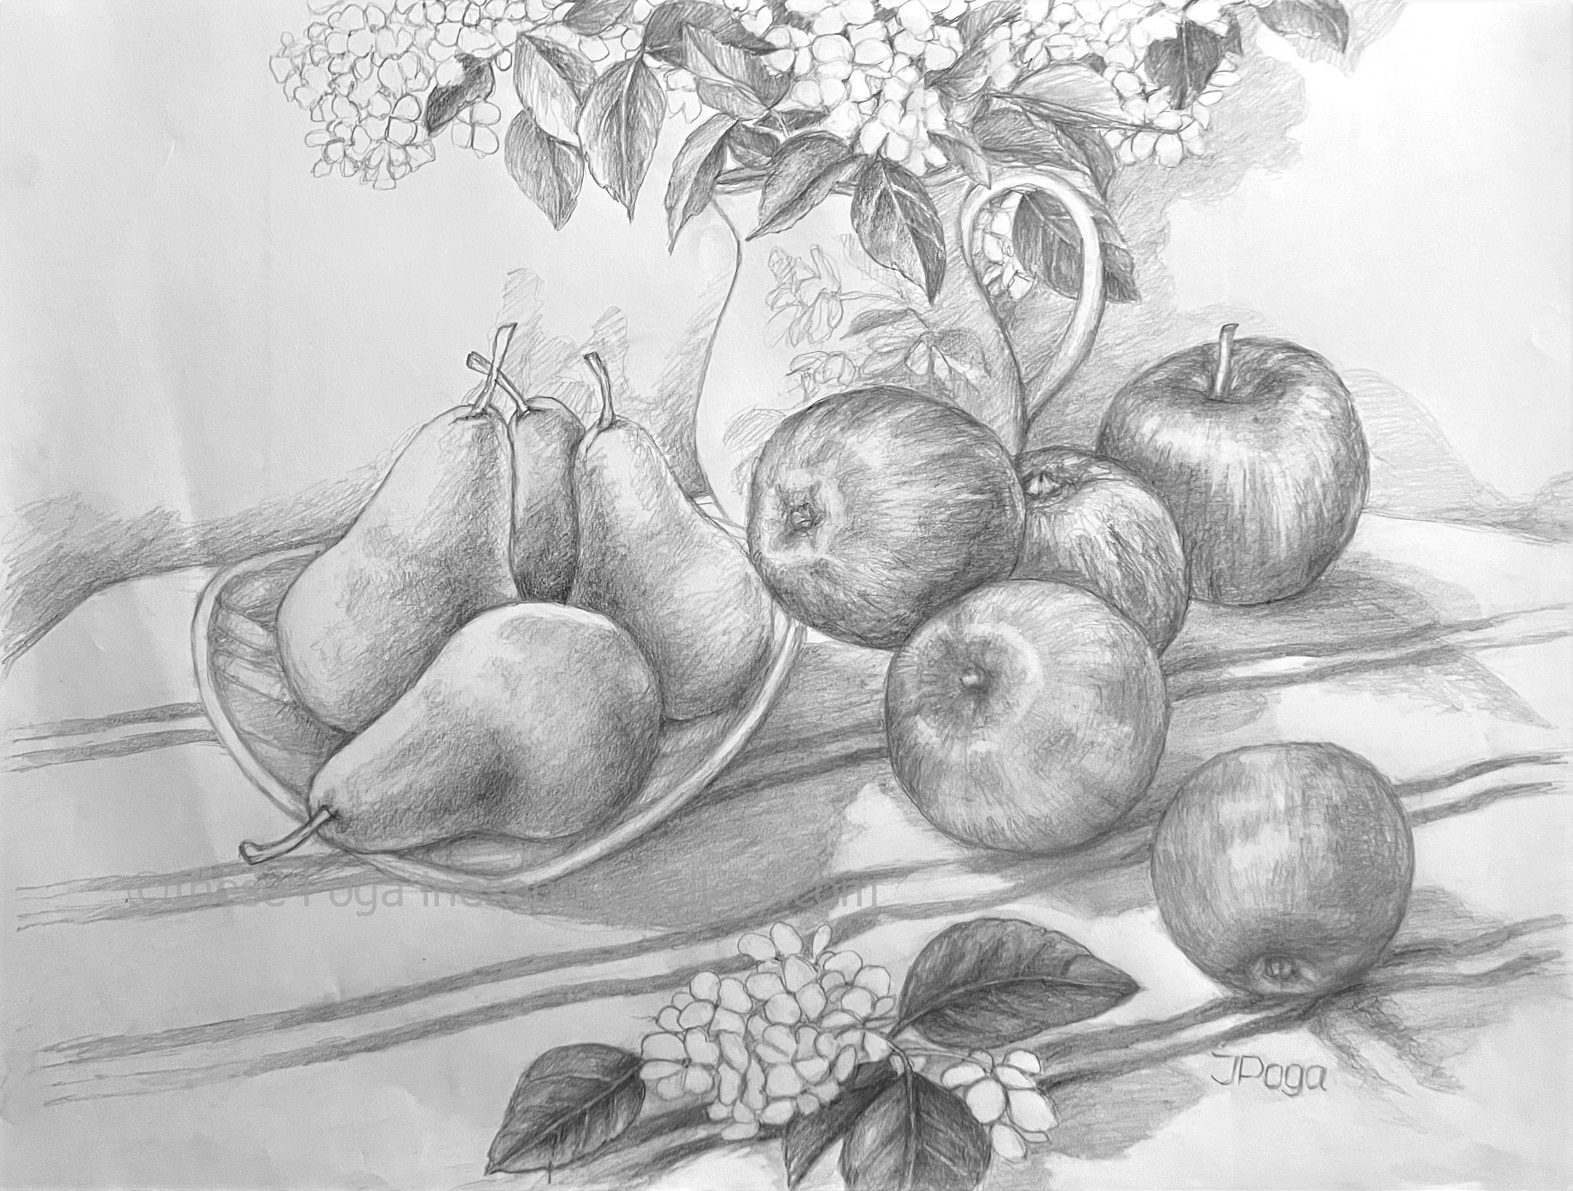 Pencil drawings and sketches - INESE'S ART STUDIO